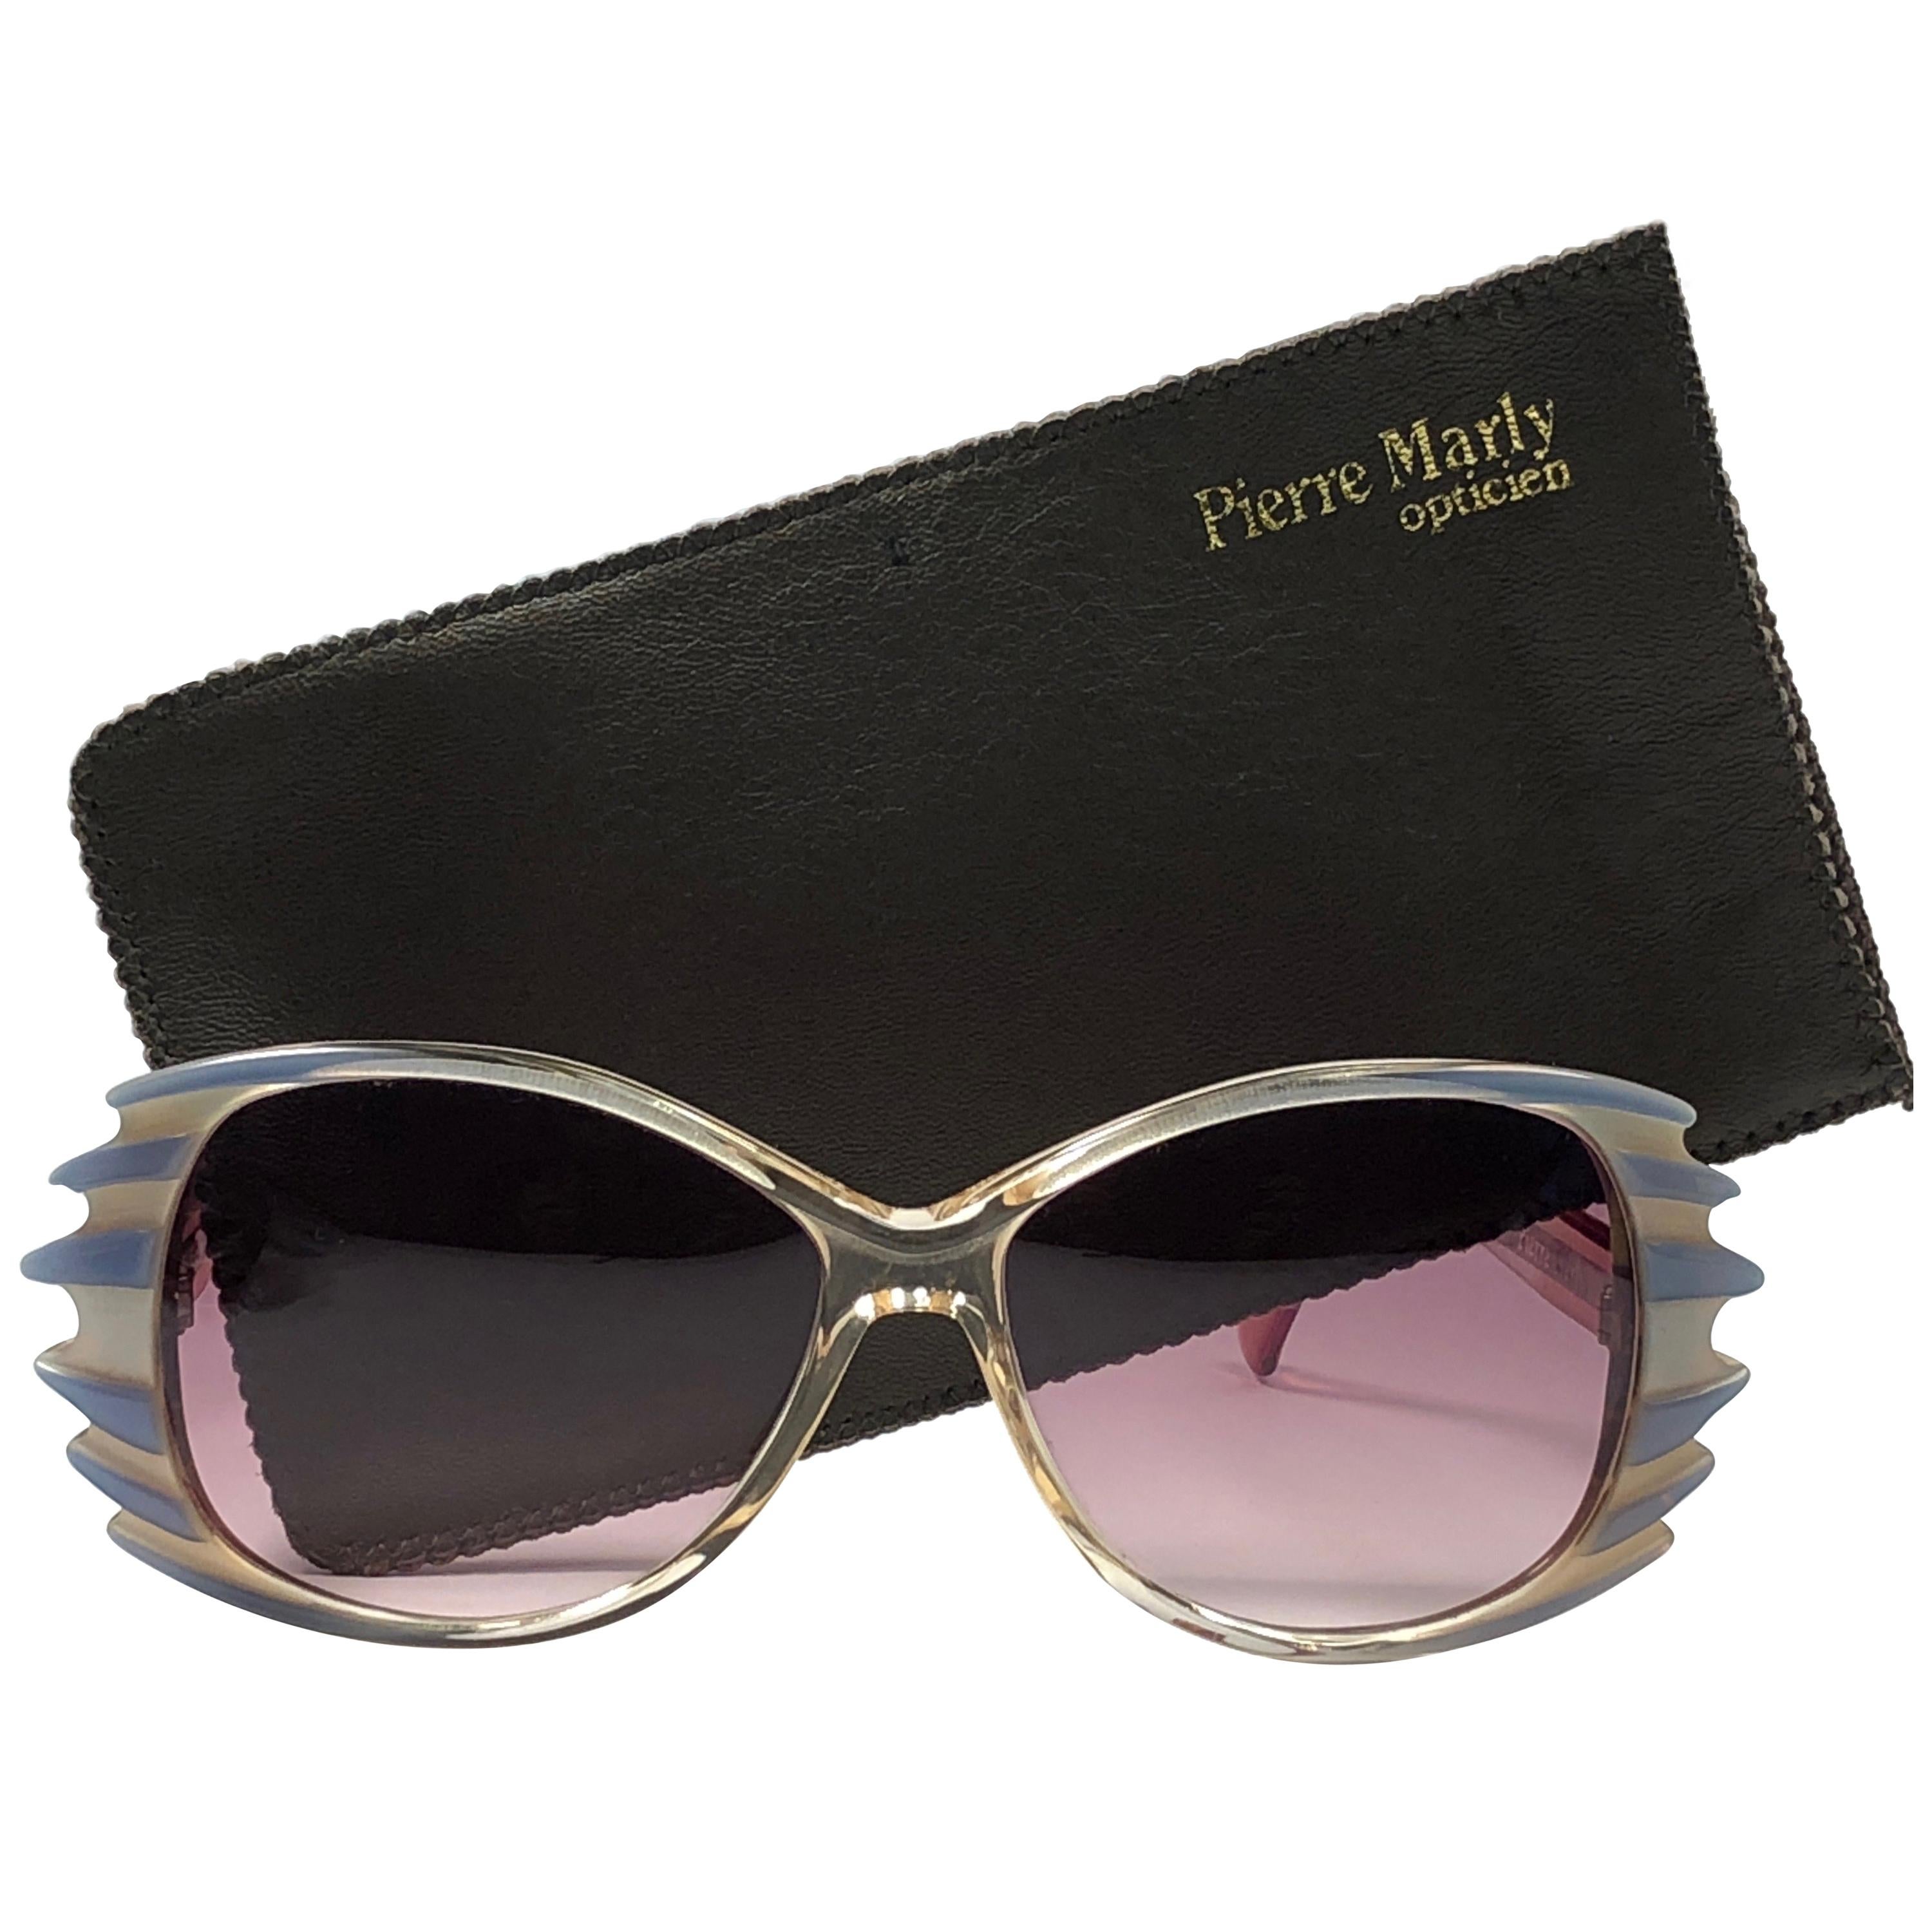 New Vintage Rare Pierre Marly " Rush " Small Avantgarde 1960 Sunglasses For Sale